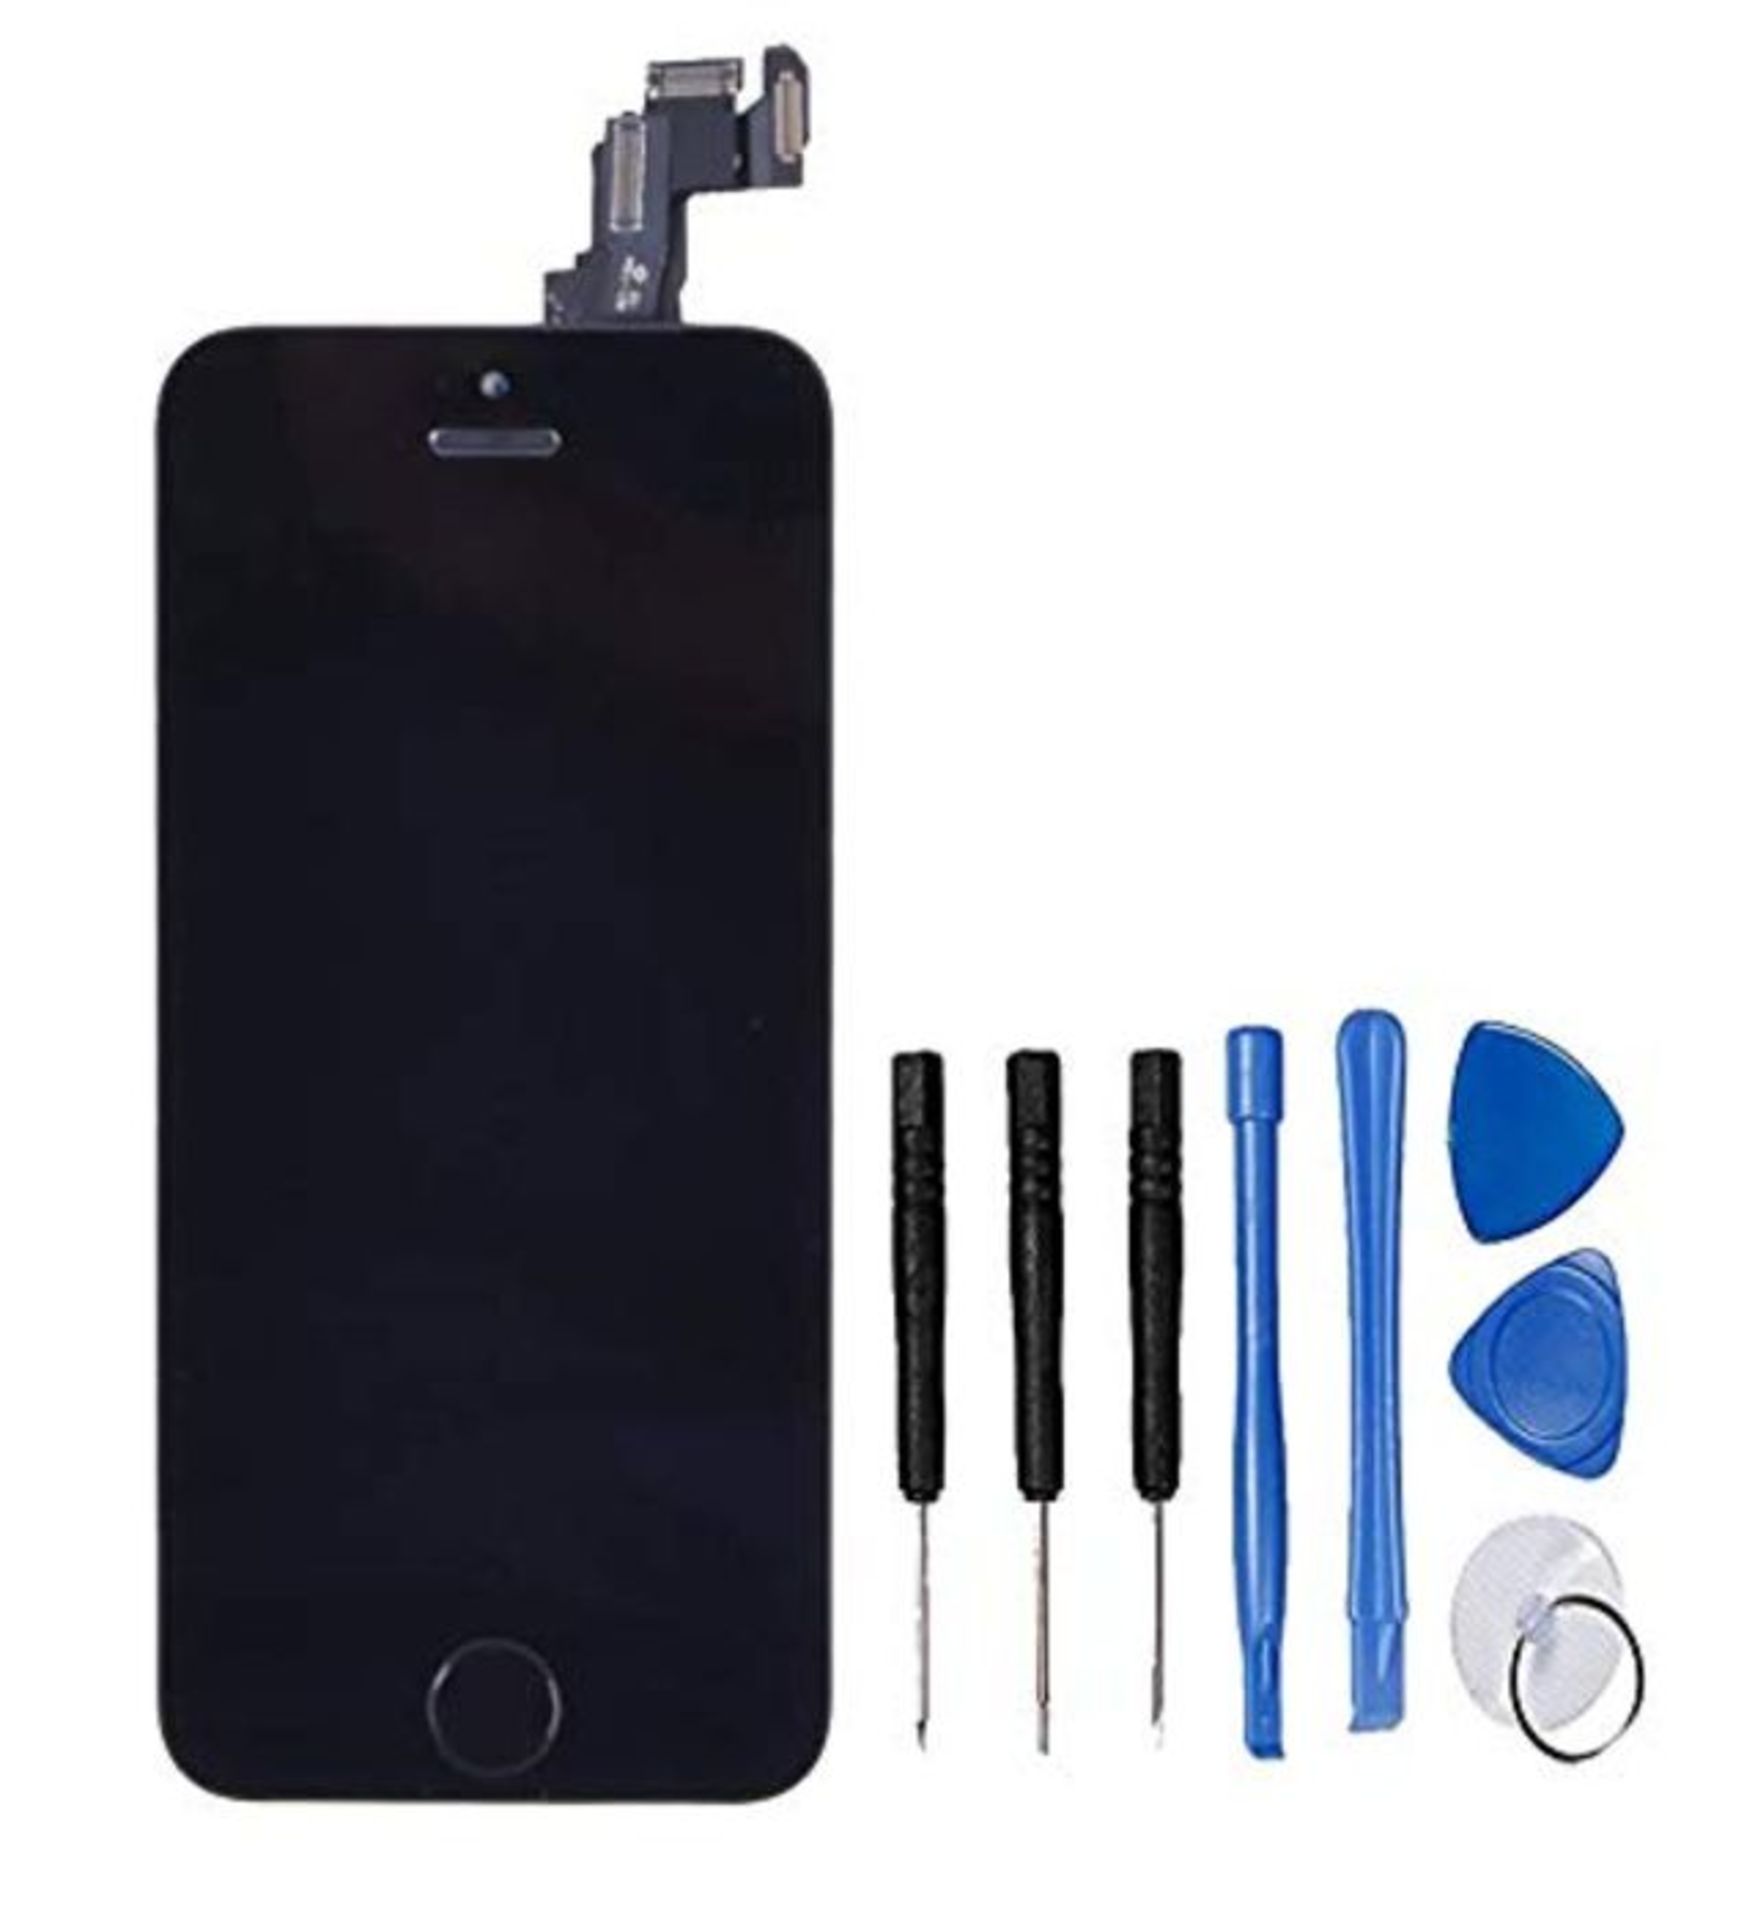 LL TRADER LCD for iPhone 5c Black Display Touch Screen Digitizer Full Assembly Replace